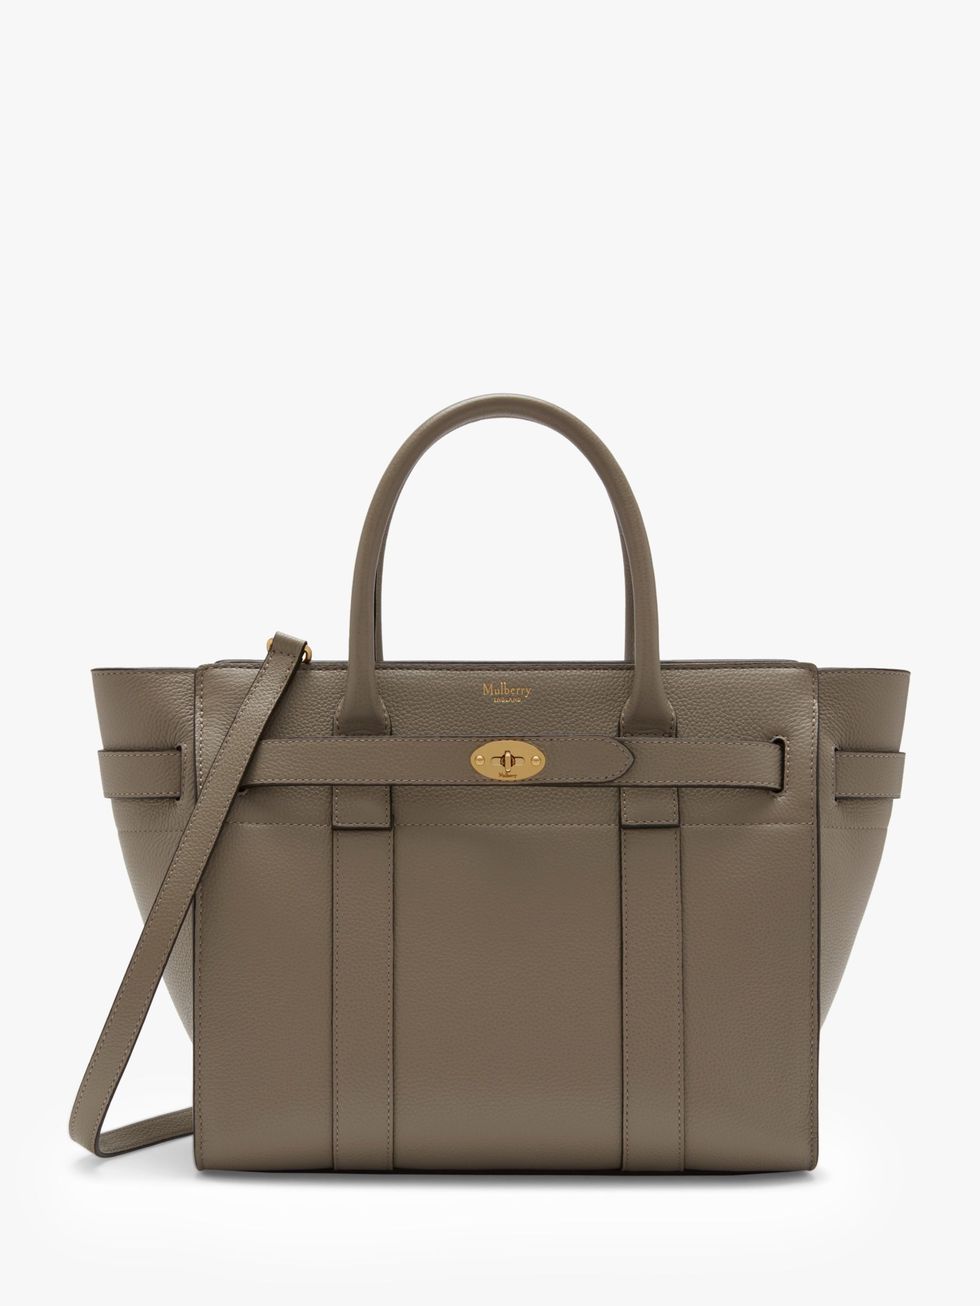 5 best Mulberry bags to own | Investment bags | Fashion